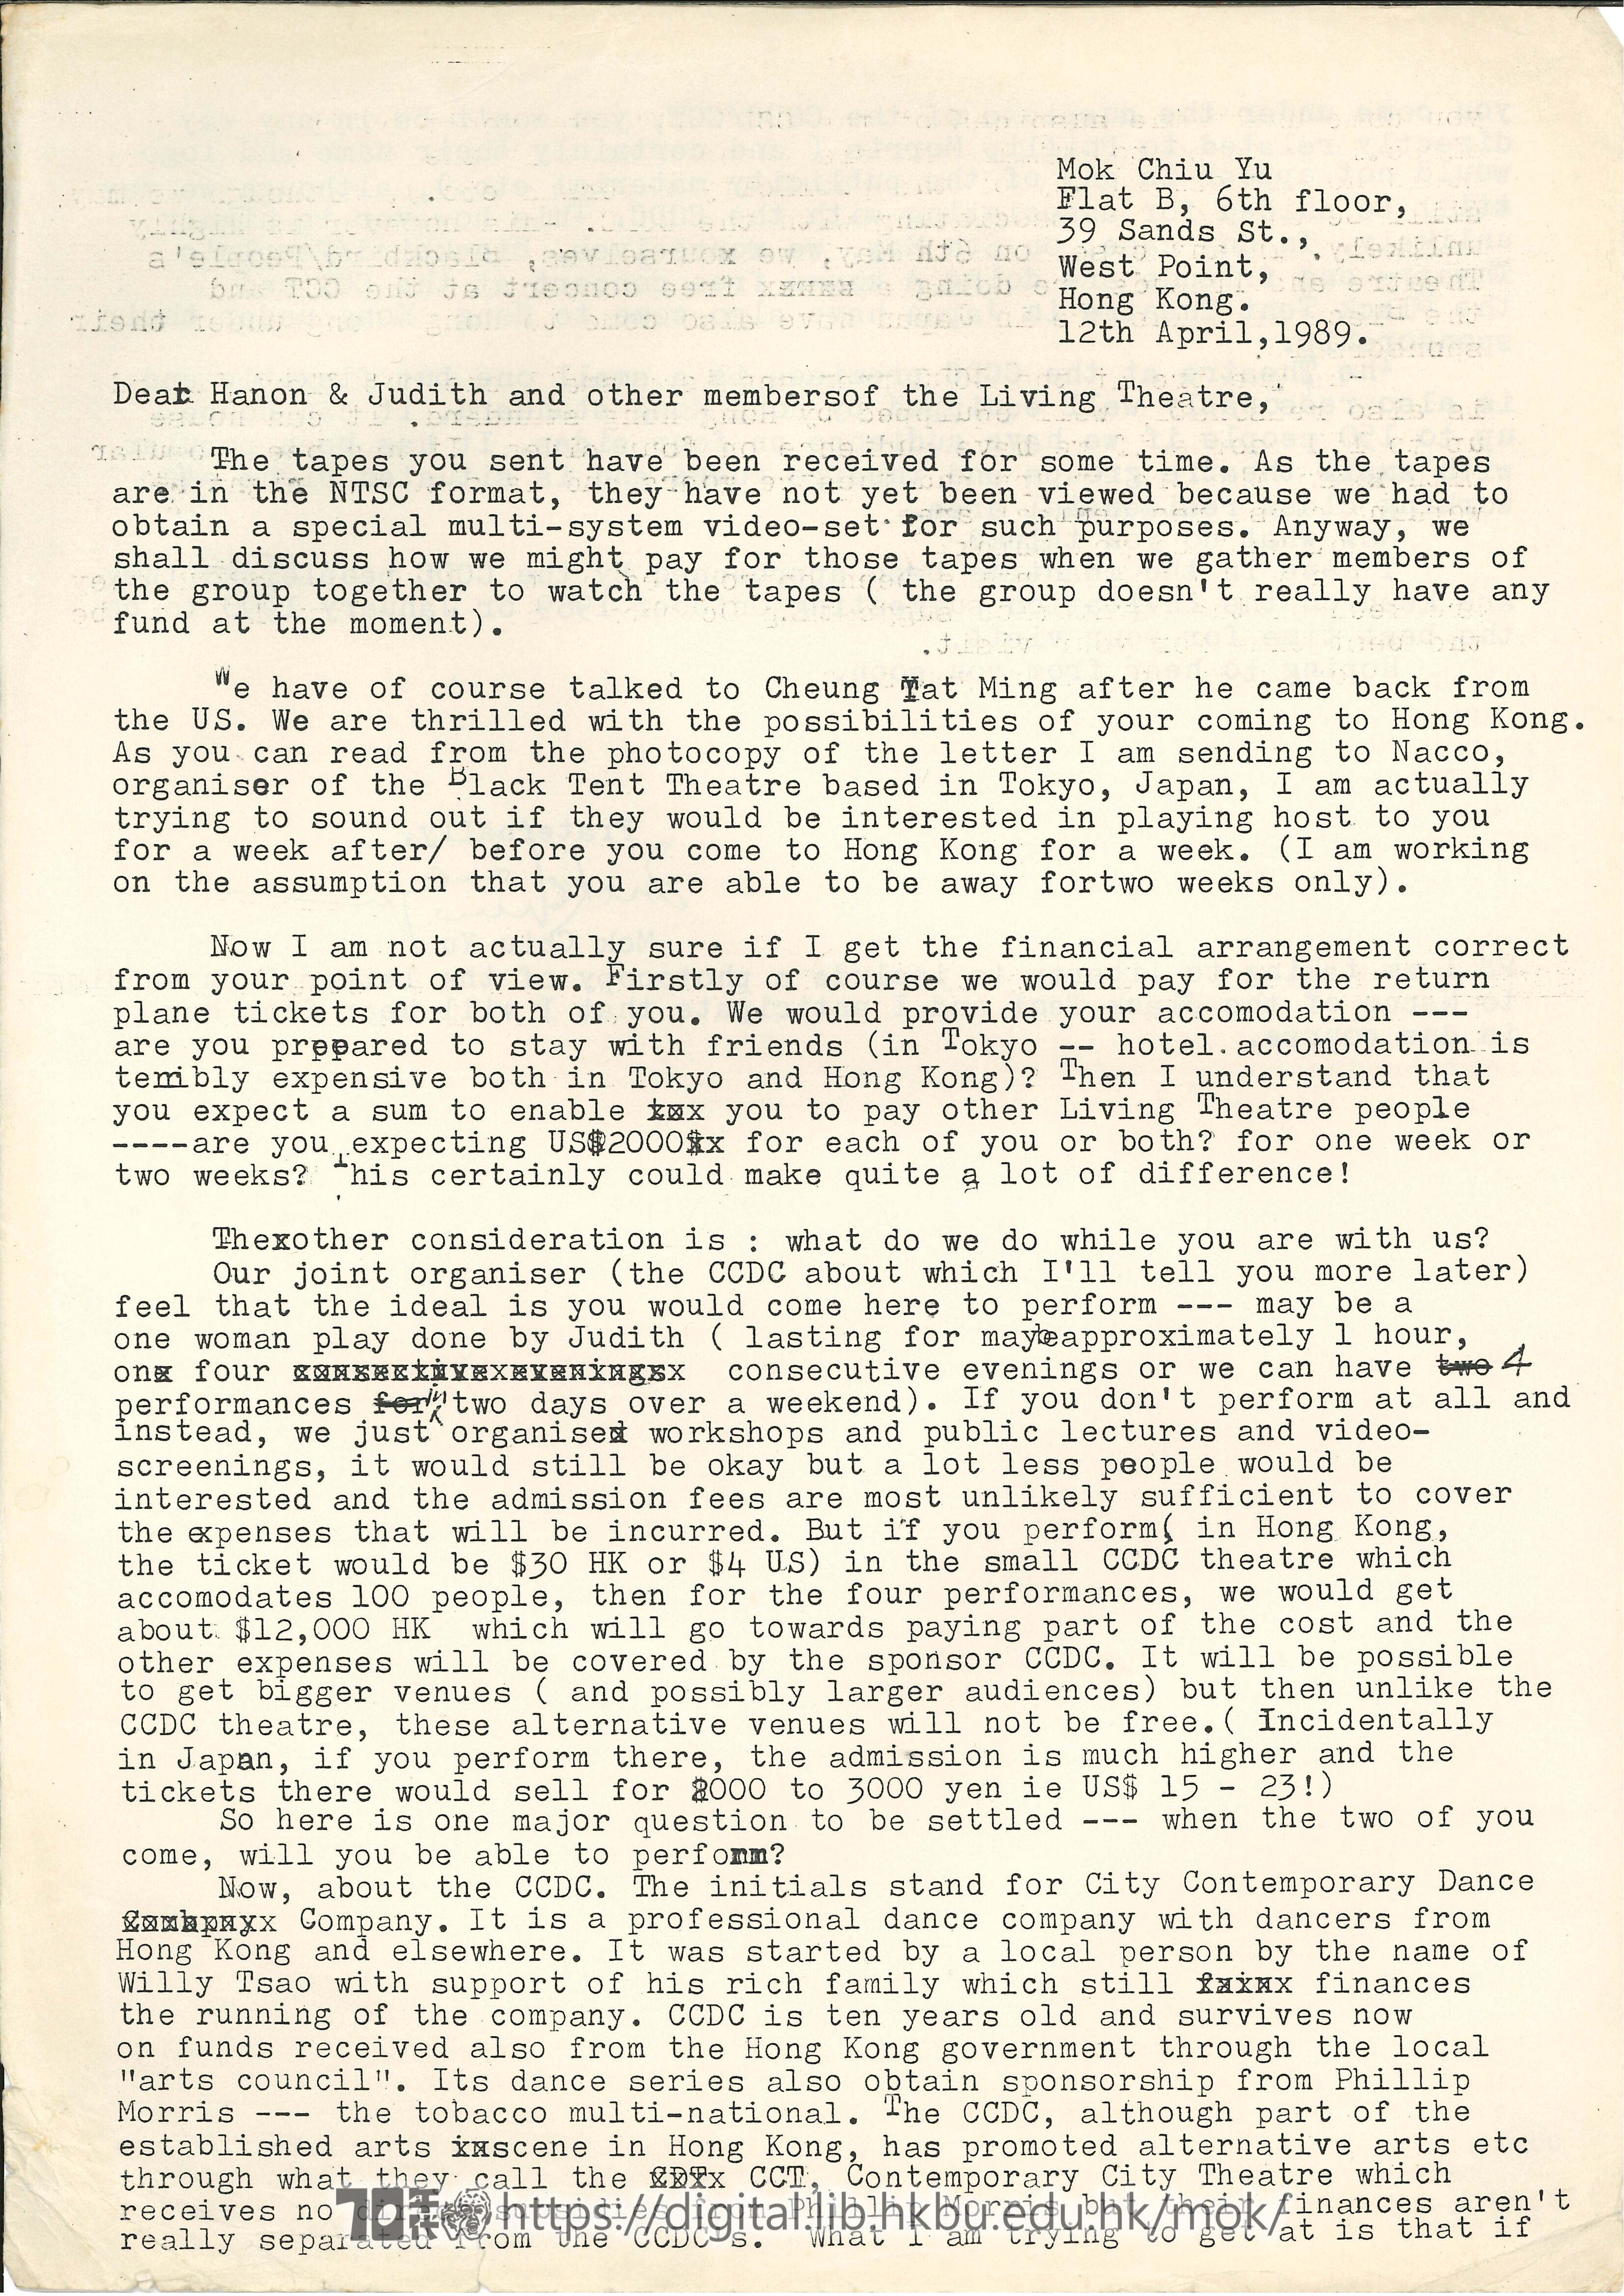   Letter from Mok Chiu Yu to Judith Beck and other comrades and friends of the Living Theatre MOK, Chiu Yu 